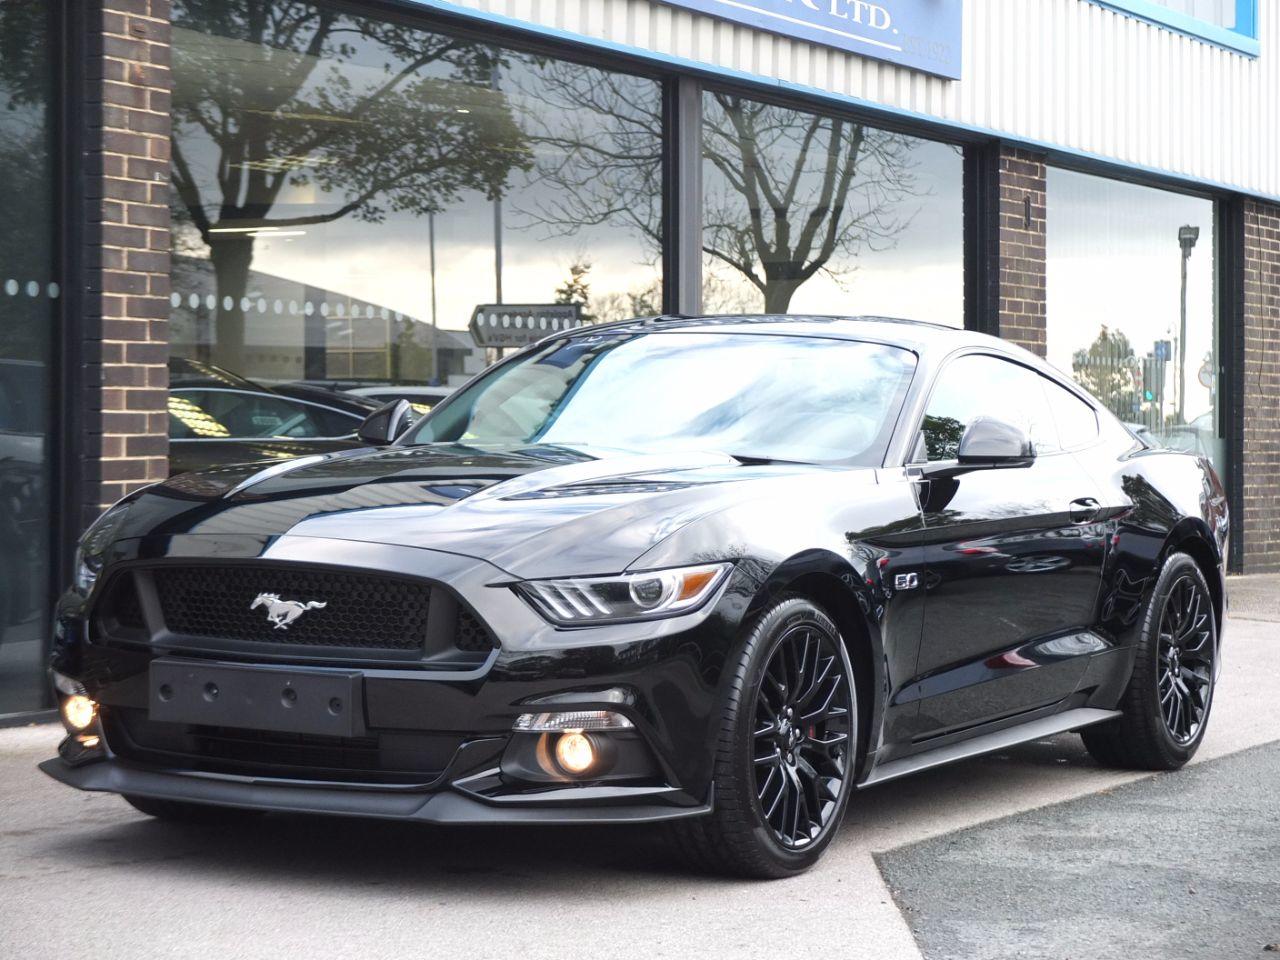 Ford Mustang 5.0 V8 GT Coupe Petrol Shadow Black Premium MetallicFord Mustang 5.0 V8 GT Coupe Petrol Shadow Black Premium Metallic at fa Roper Ltd Bradford